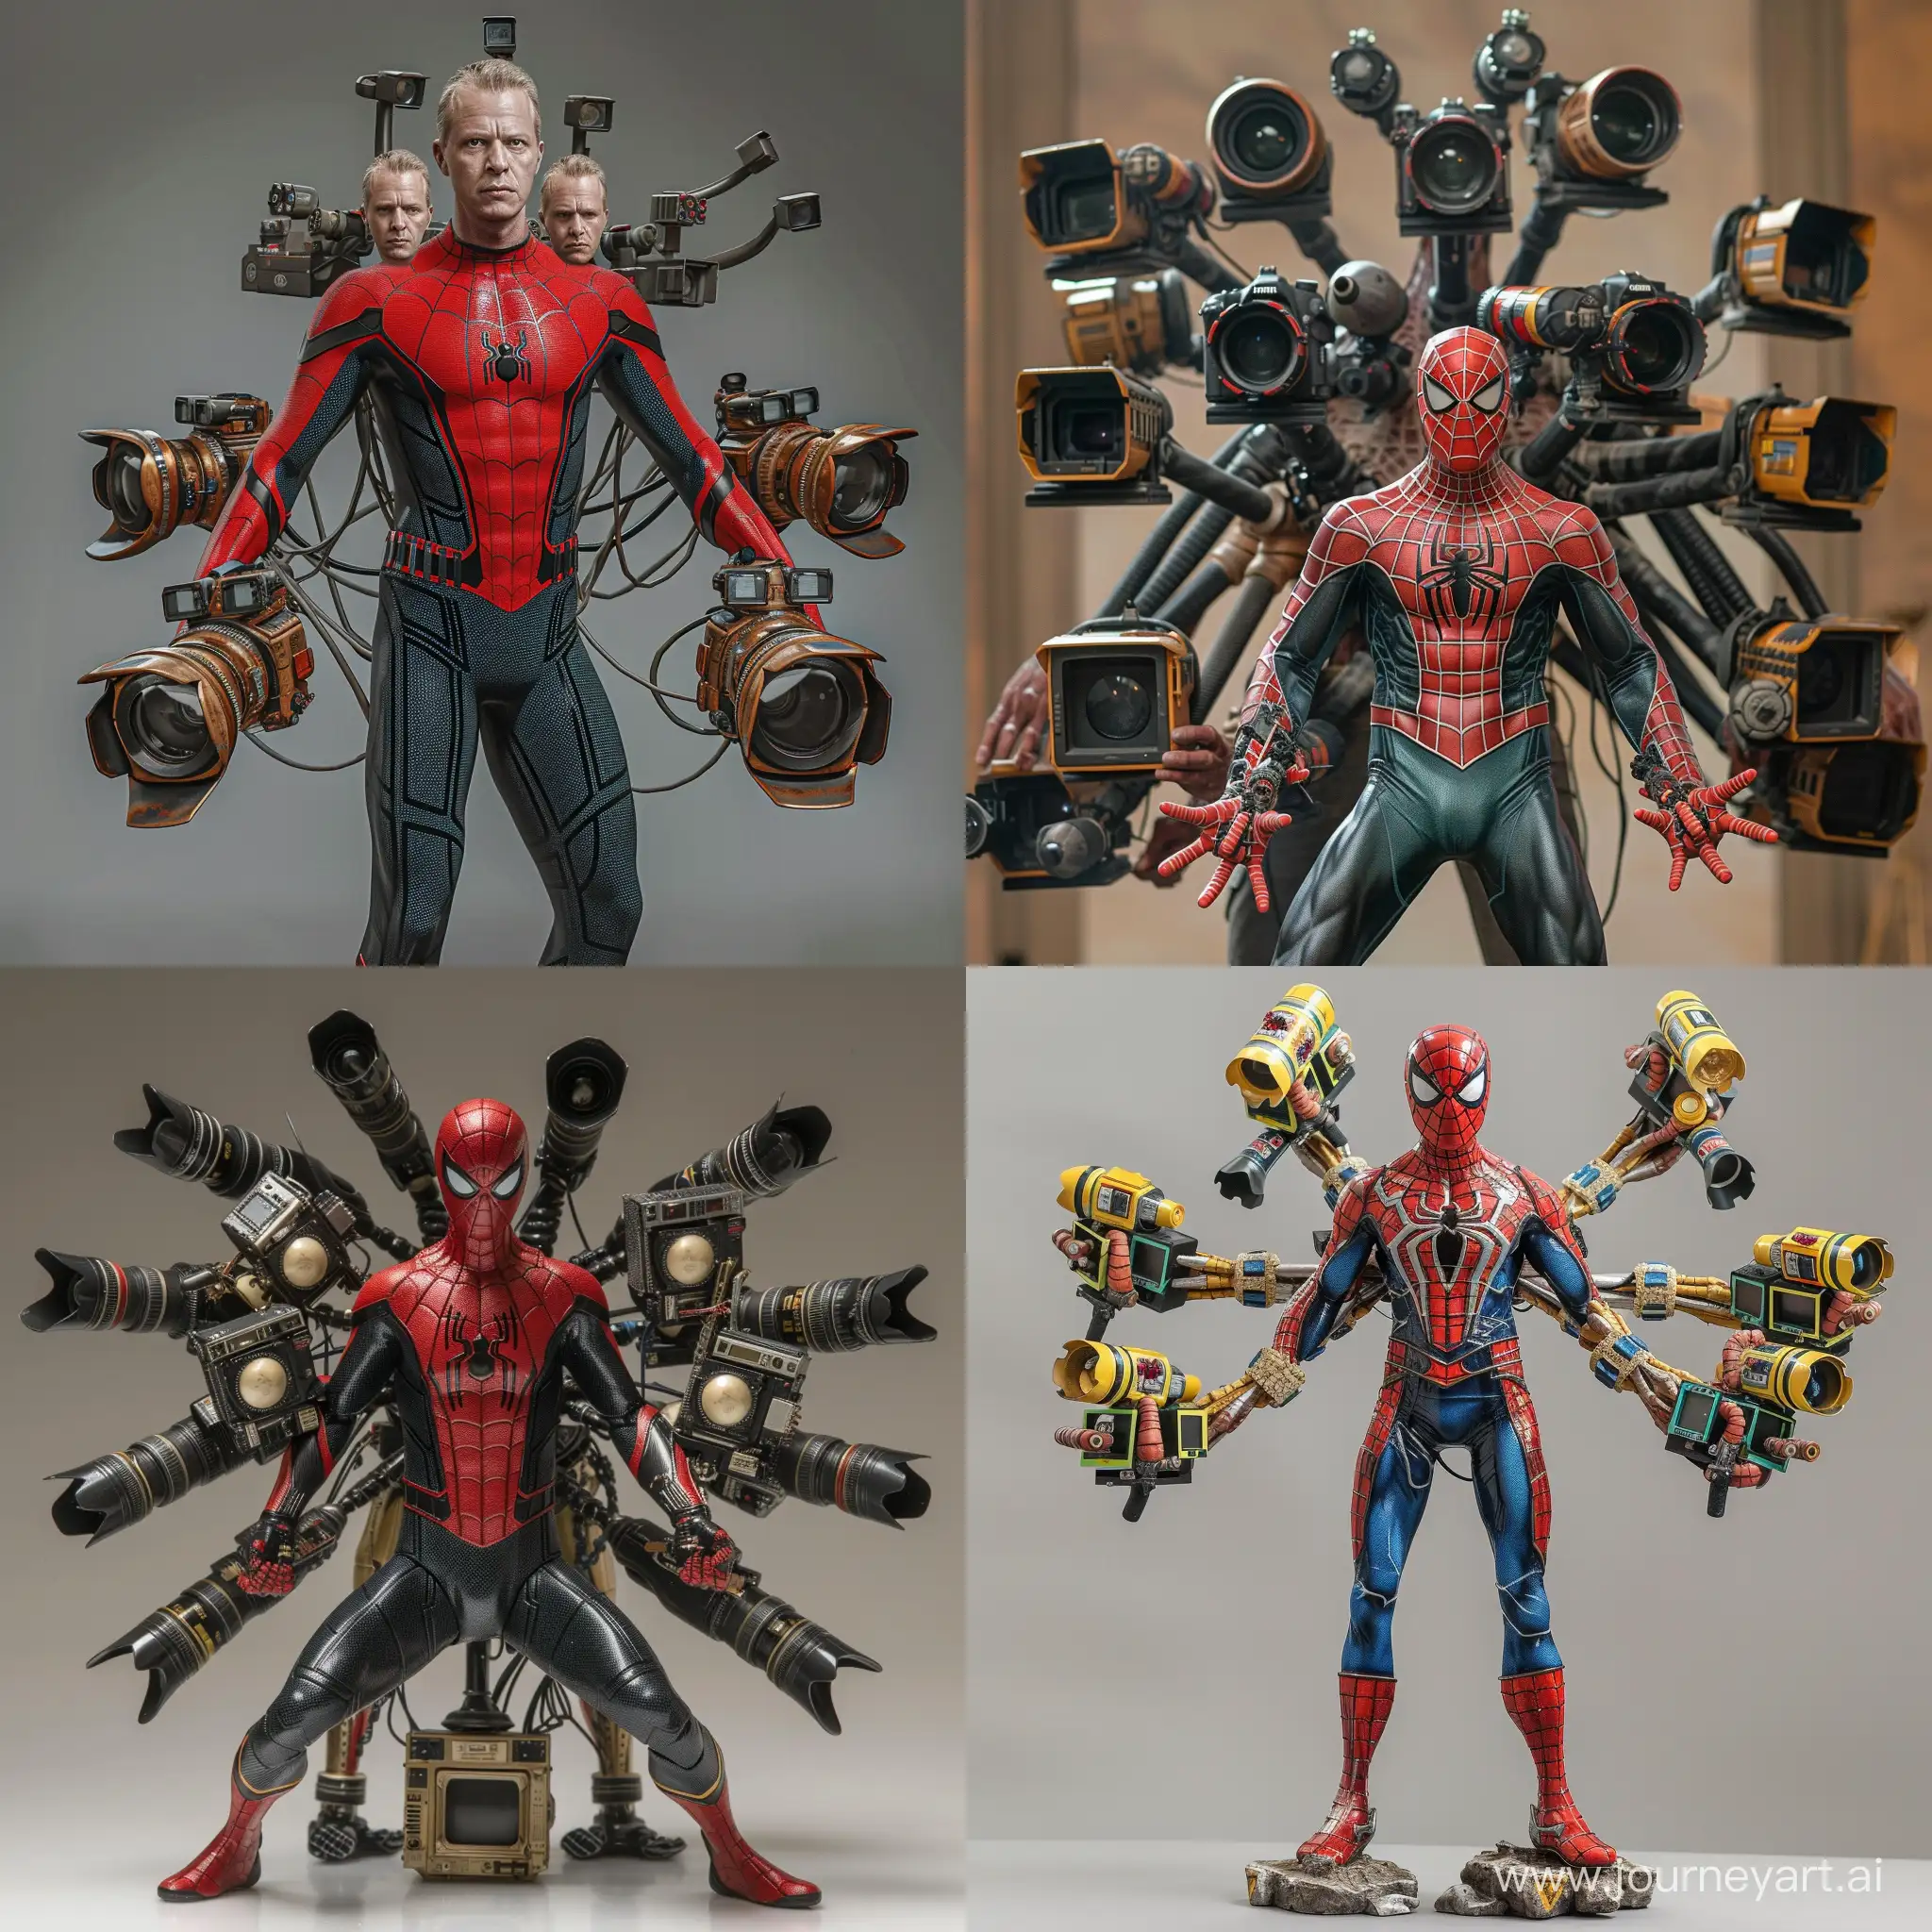 Titan-Spiderman-Surrounded-by-Titan-Cameramen-and-TV-Men-with-Cannon-Hands